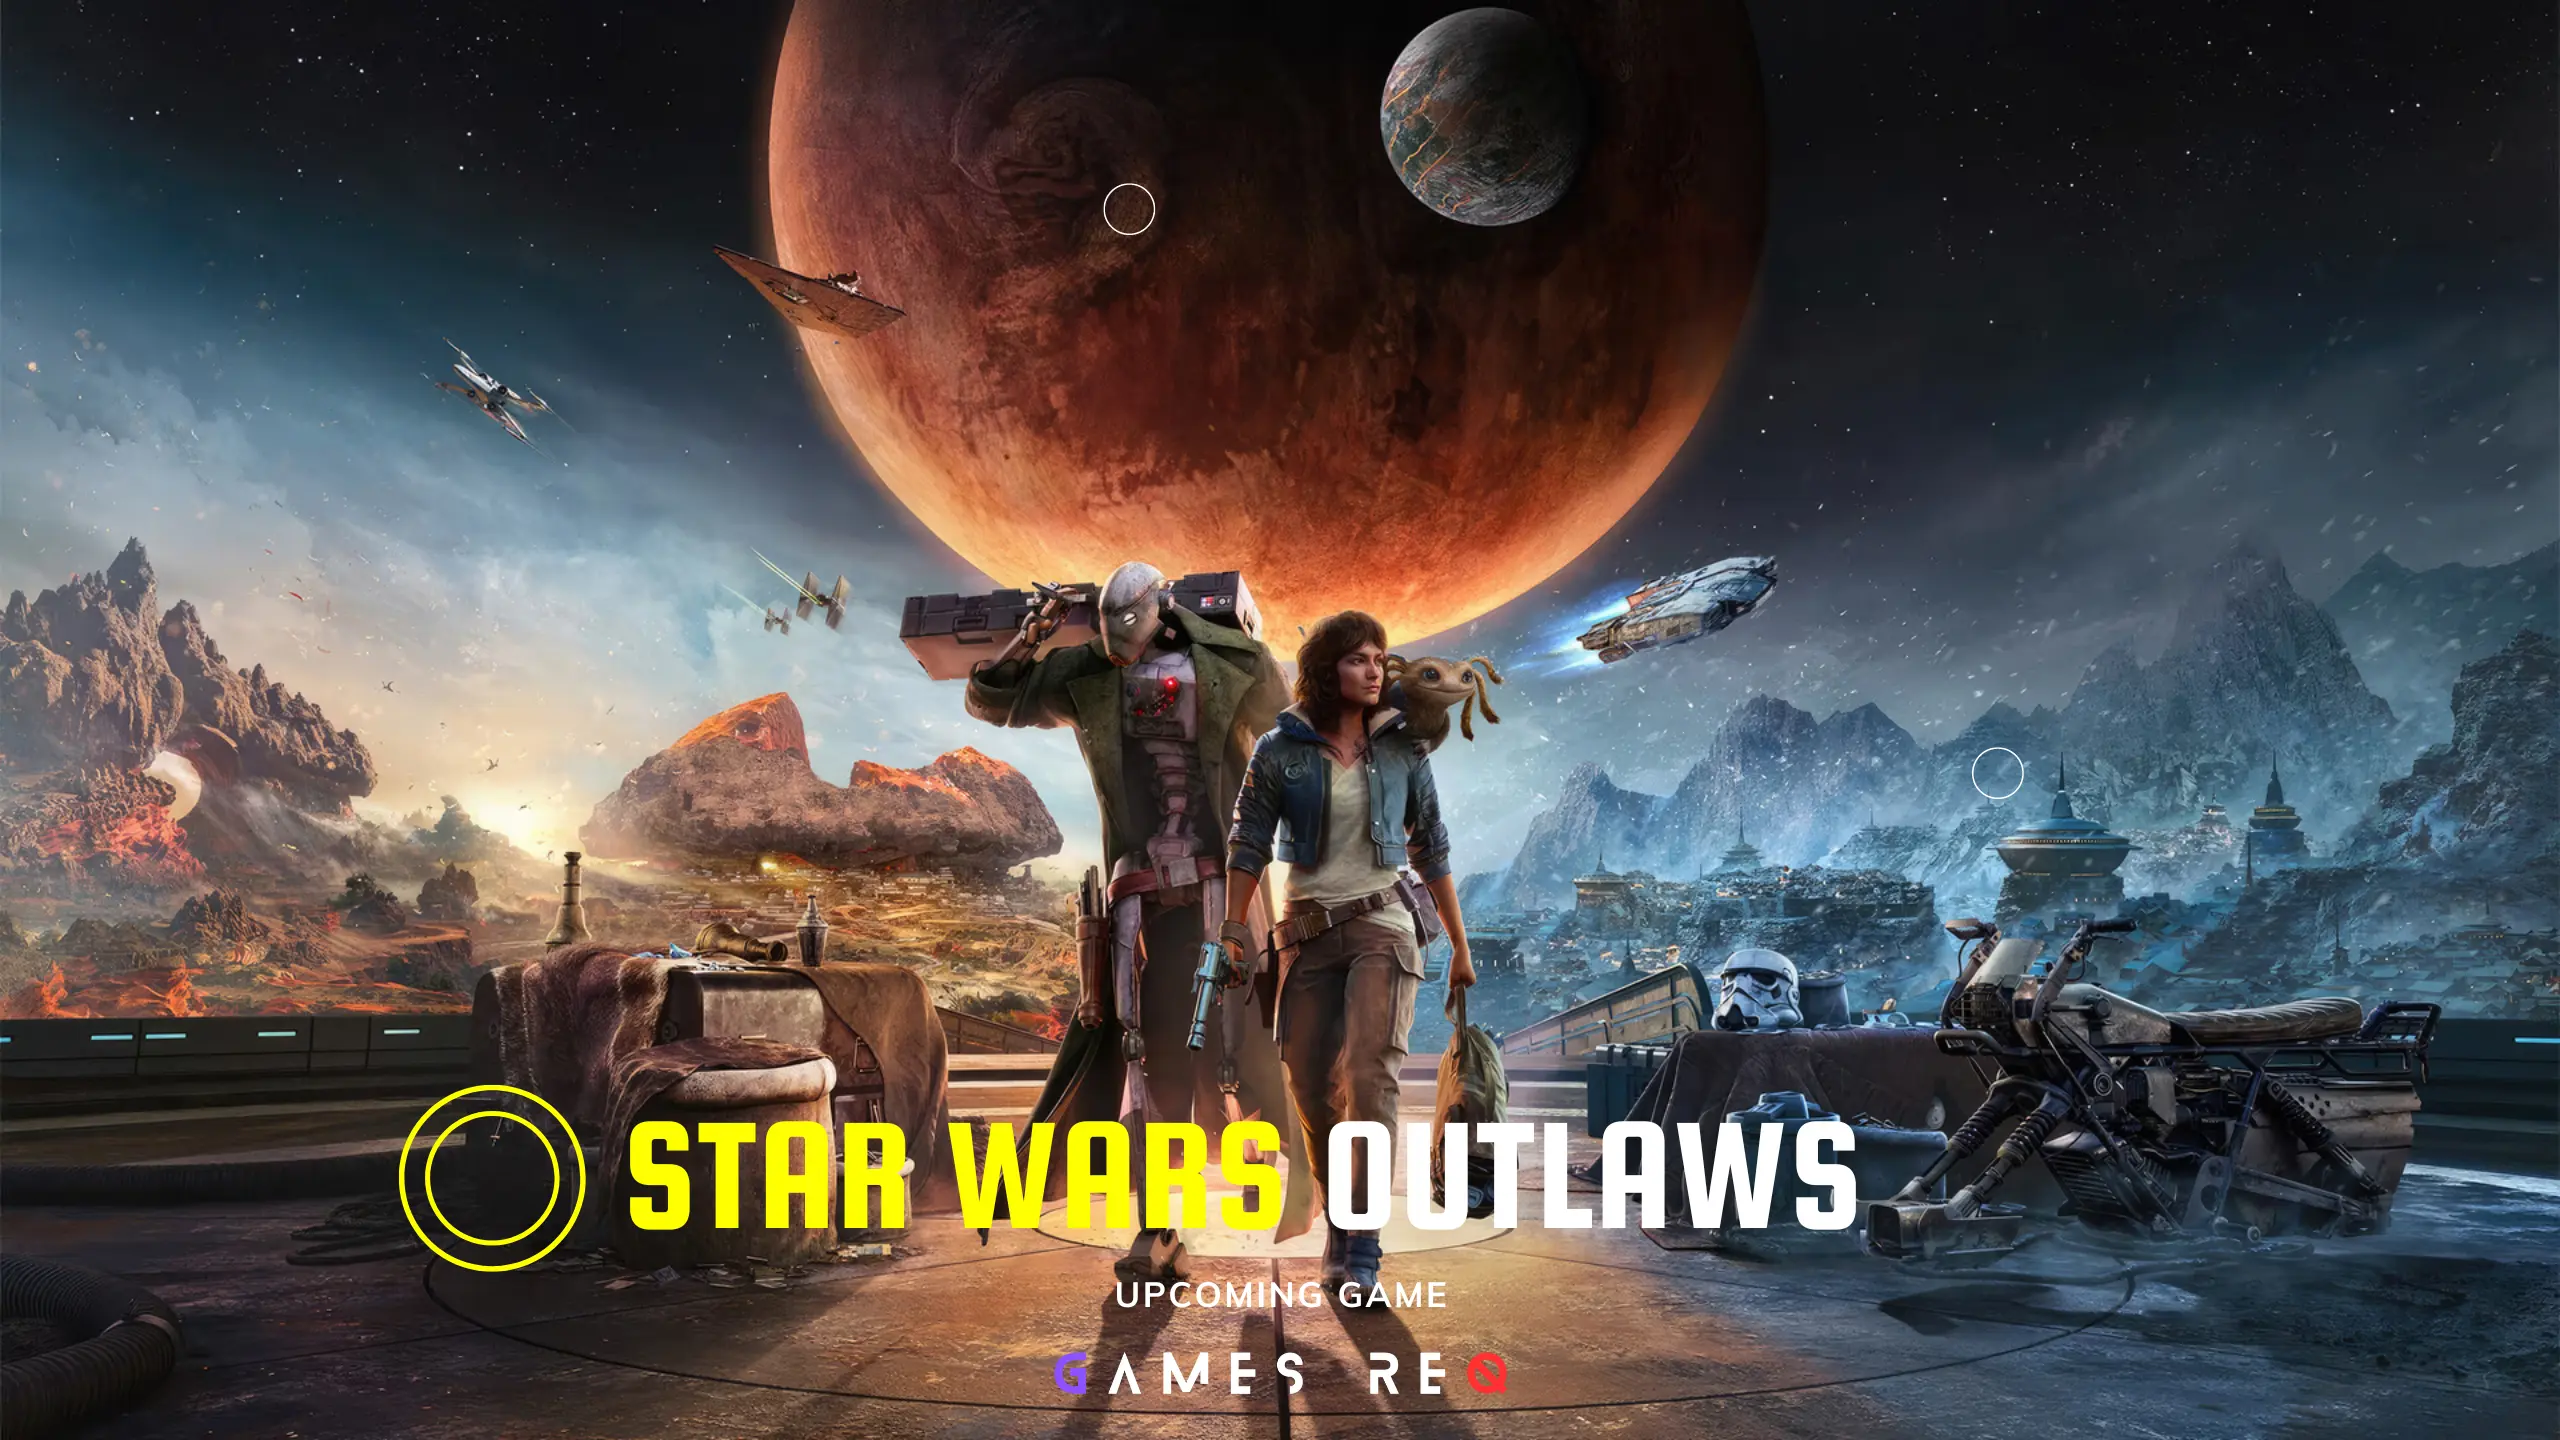 Star Wars Outlaws System Requirements - Get Ready To Battle!